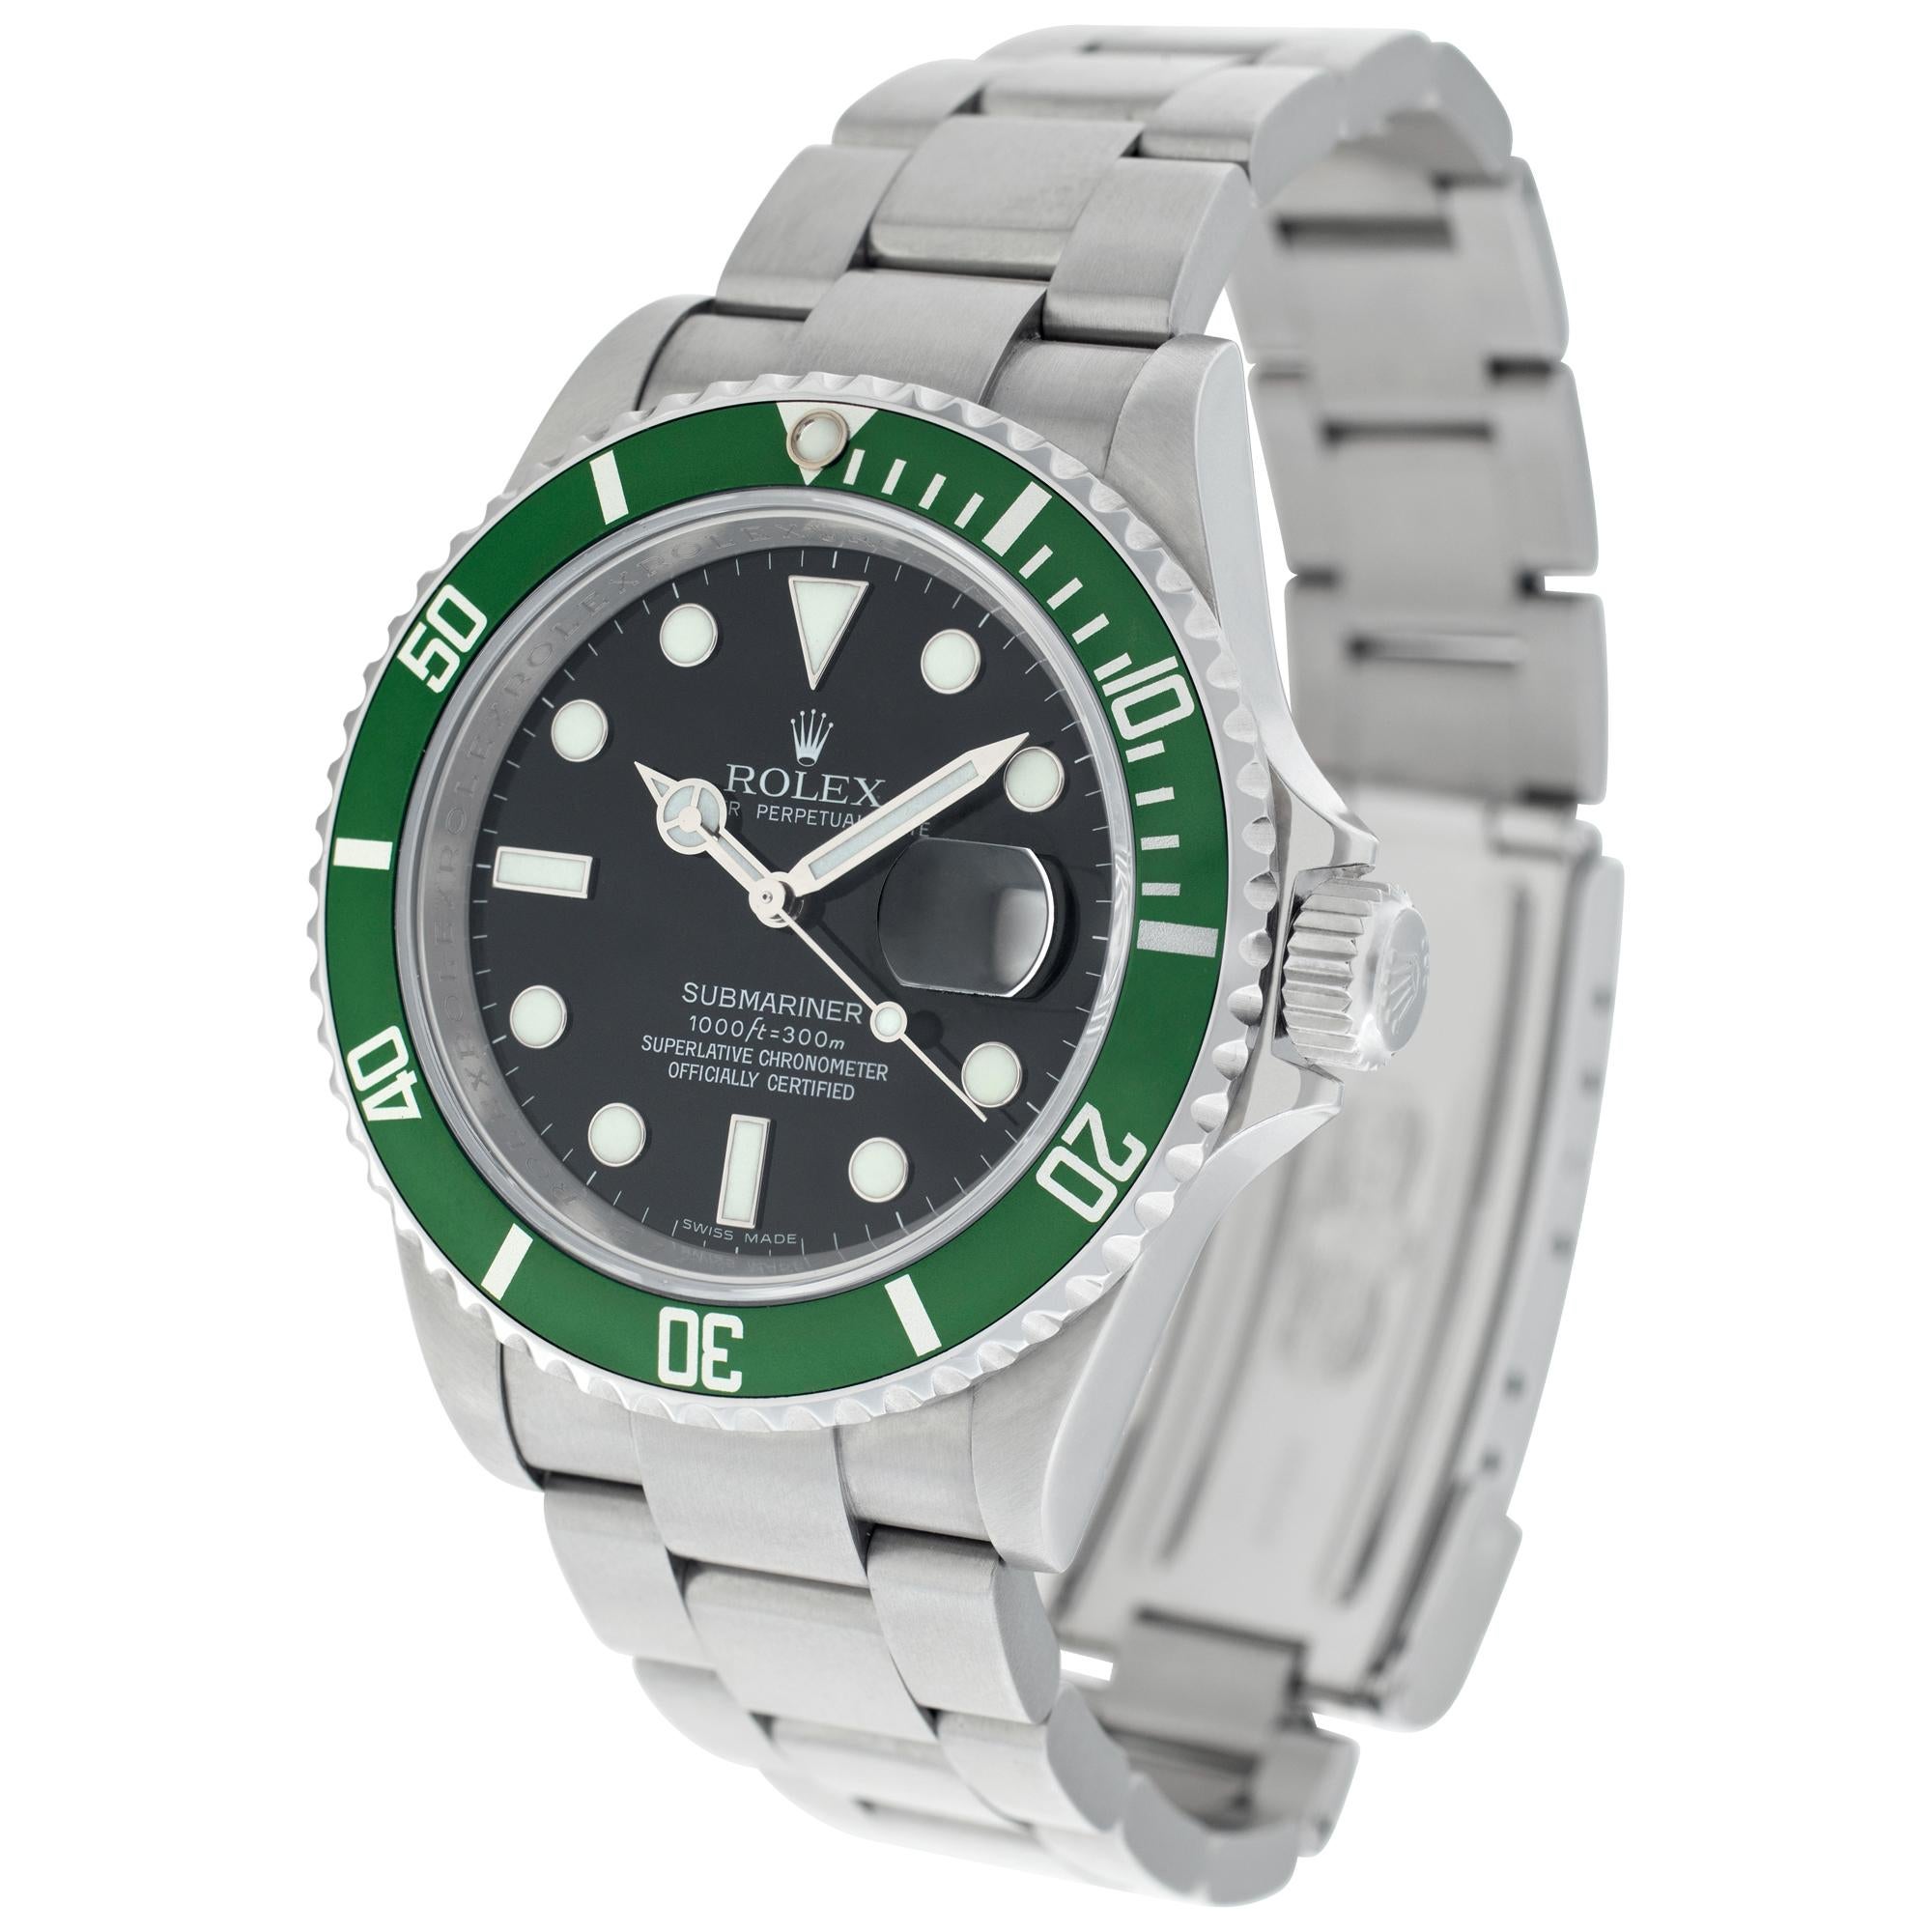 Rolex Submariner Kermit in stainless steel. Auto w/ sweep seconds and date. 40 mm case size. **Bank wire only at this price** Ref 16610lv. Circa 2009. Fine Pre-owned Rolex Watch. Certified preowned Sport Rolex Submariner Kermit 16610lv watch is made